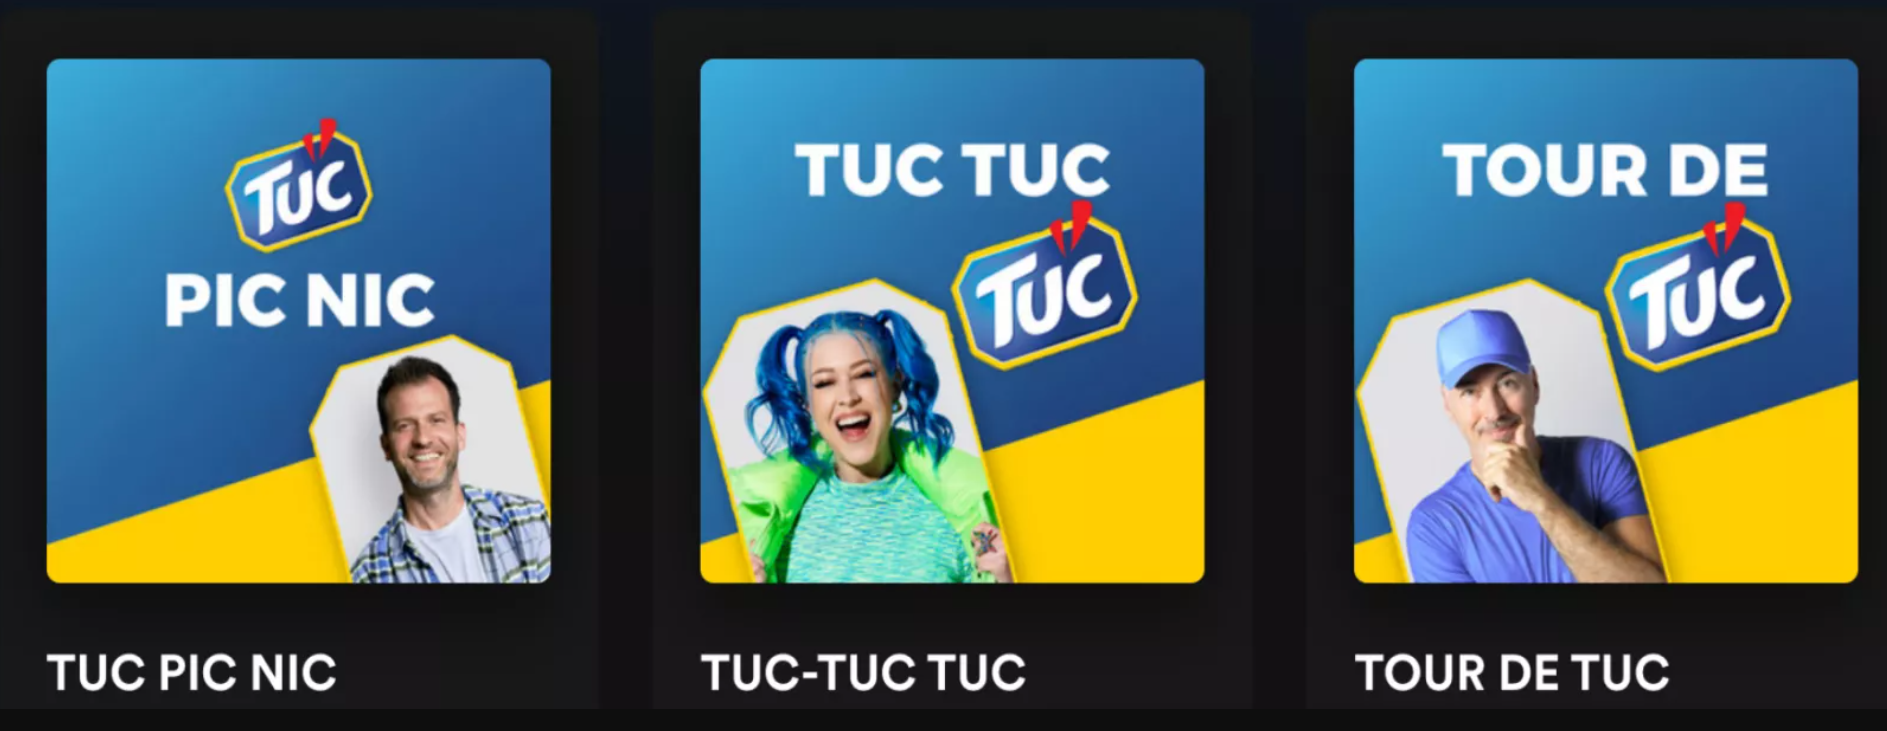 spotify_tuctuc.png